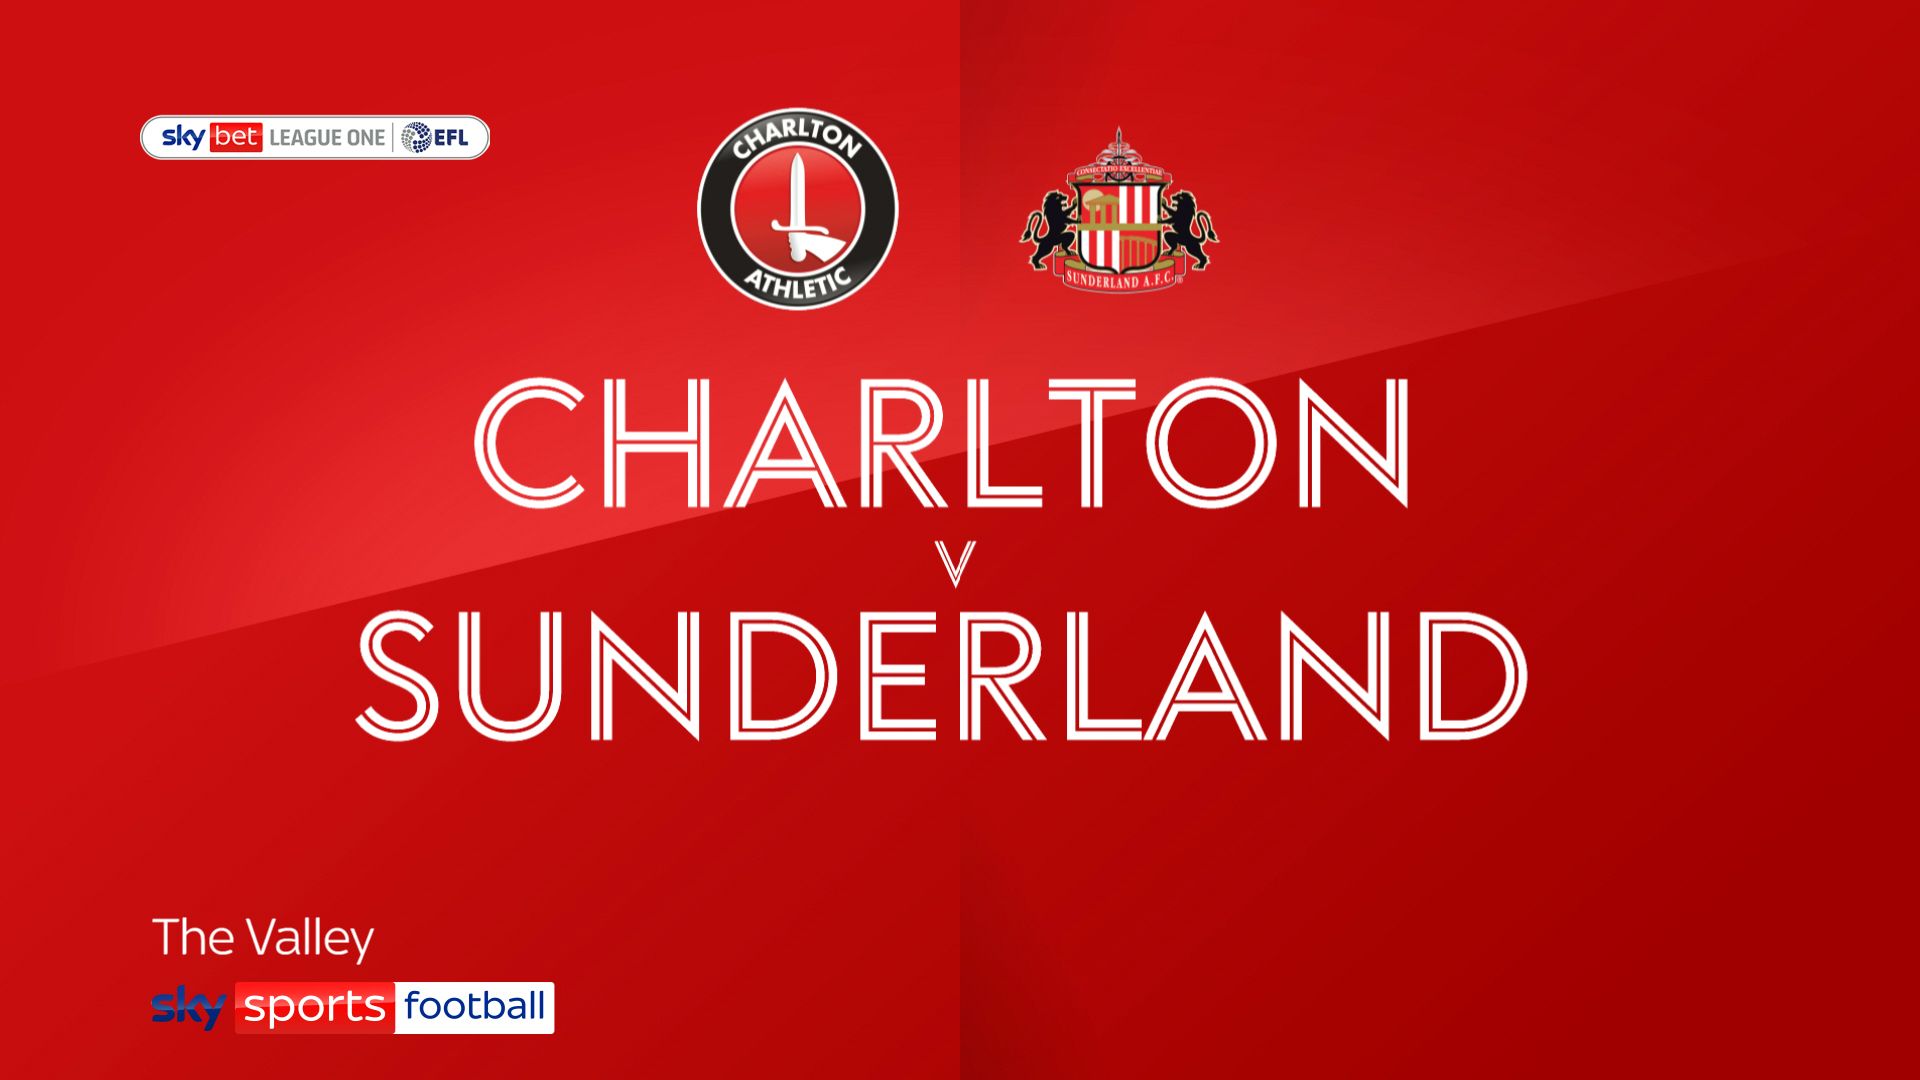 Sunderland's play-off hopes dented by Charlton draw